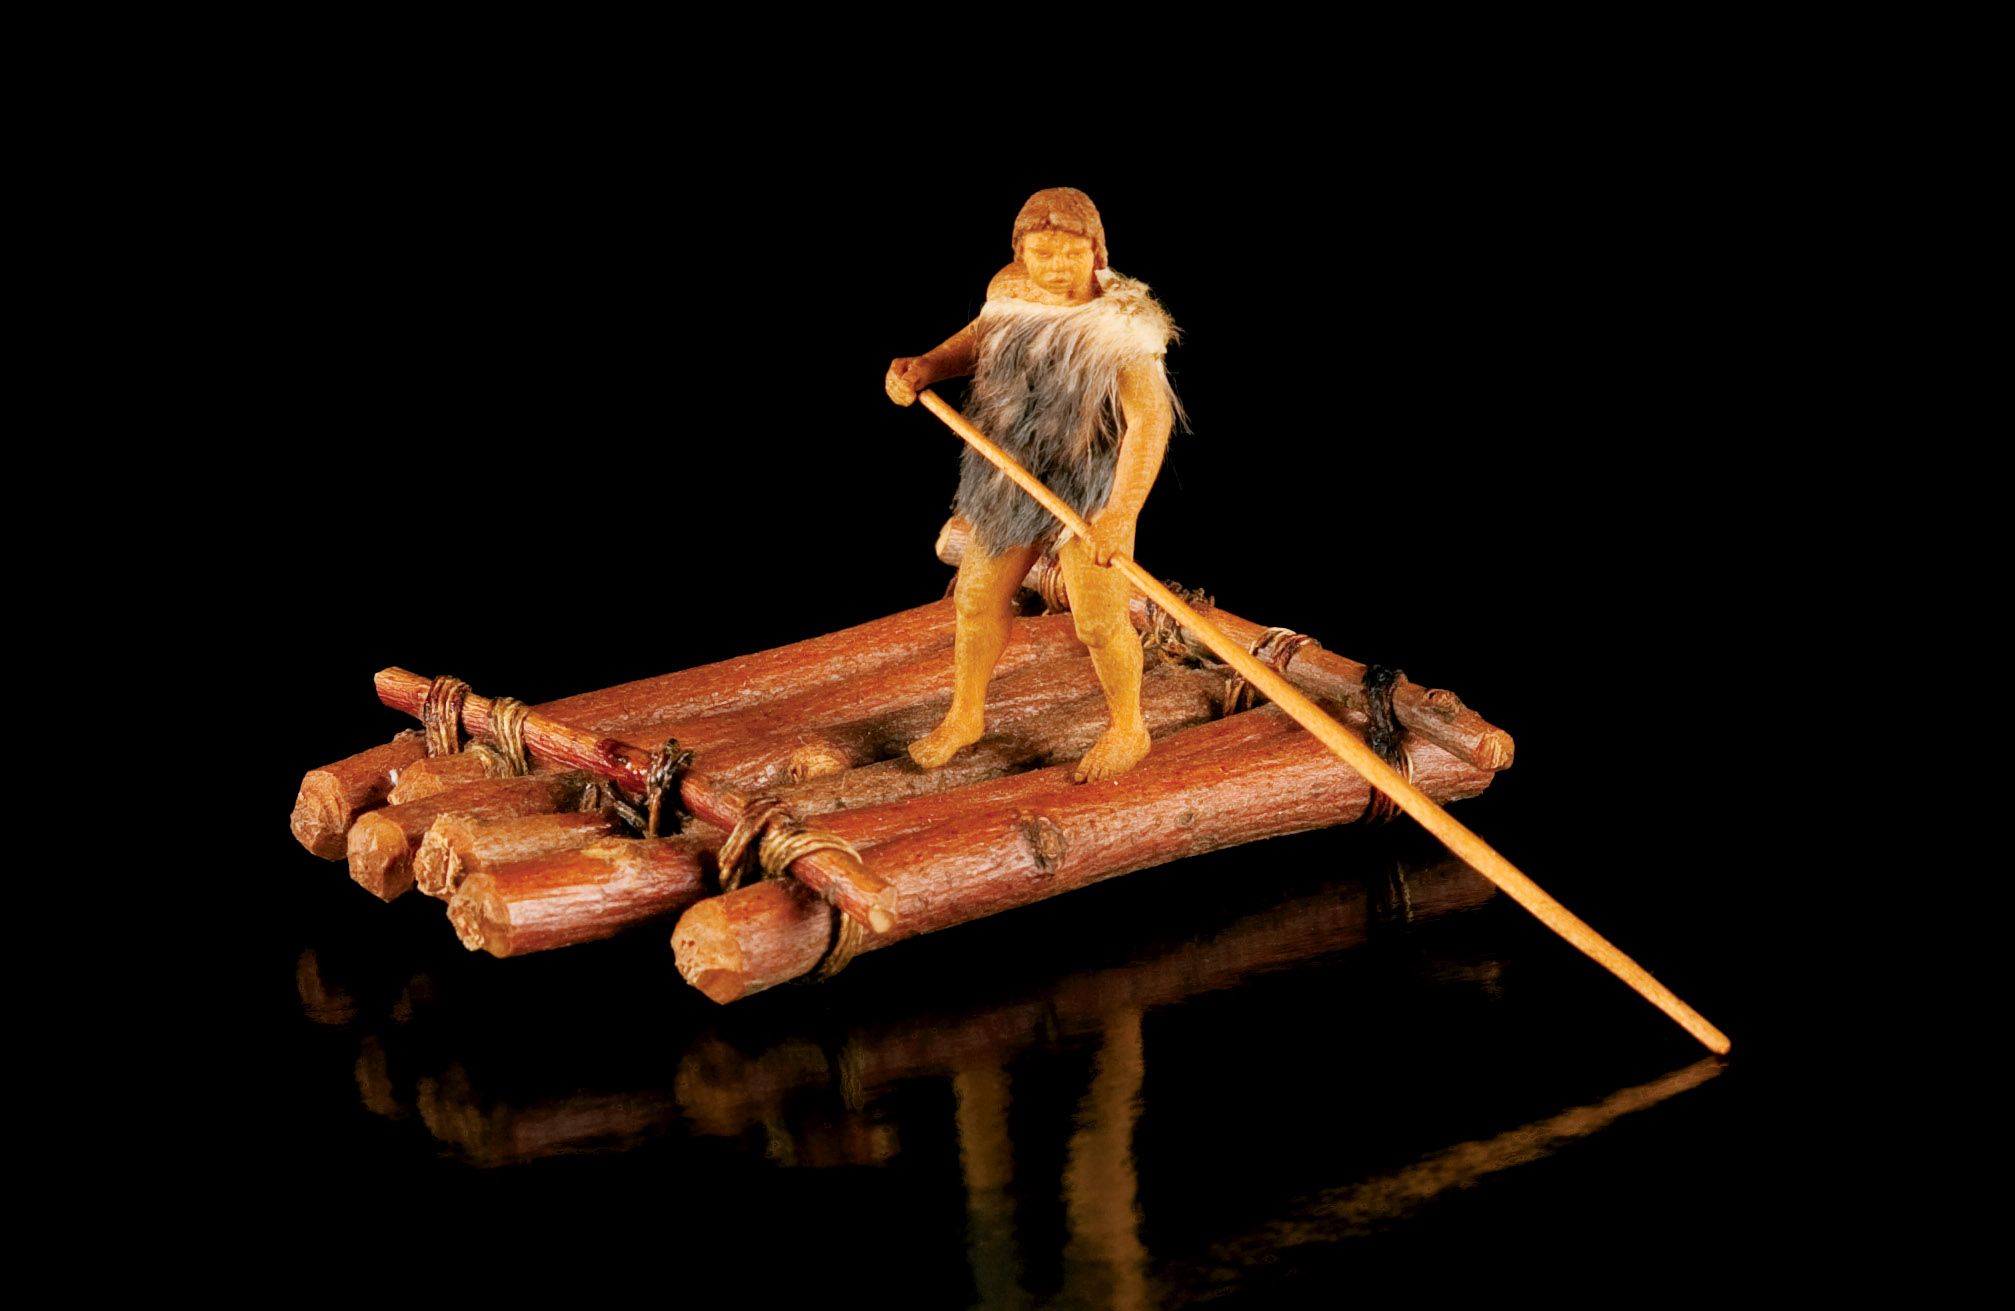 Many are familiar with August Crabtree’s miniature ships, crafted in exquisite detail. Above is one of his more primitive models: Six-log Raft, 1961.